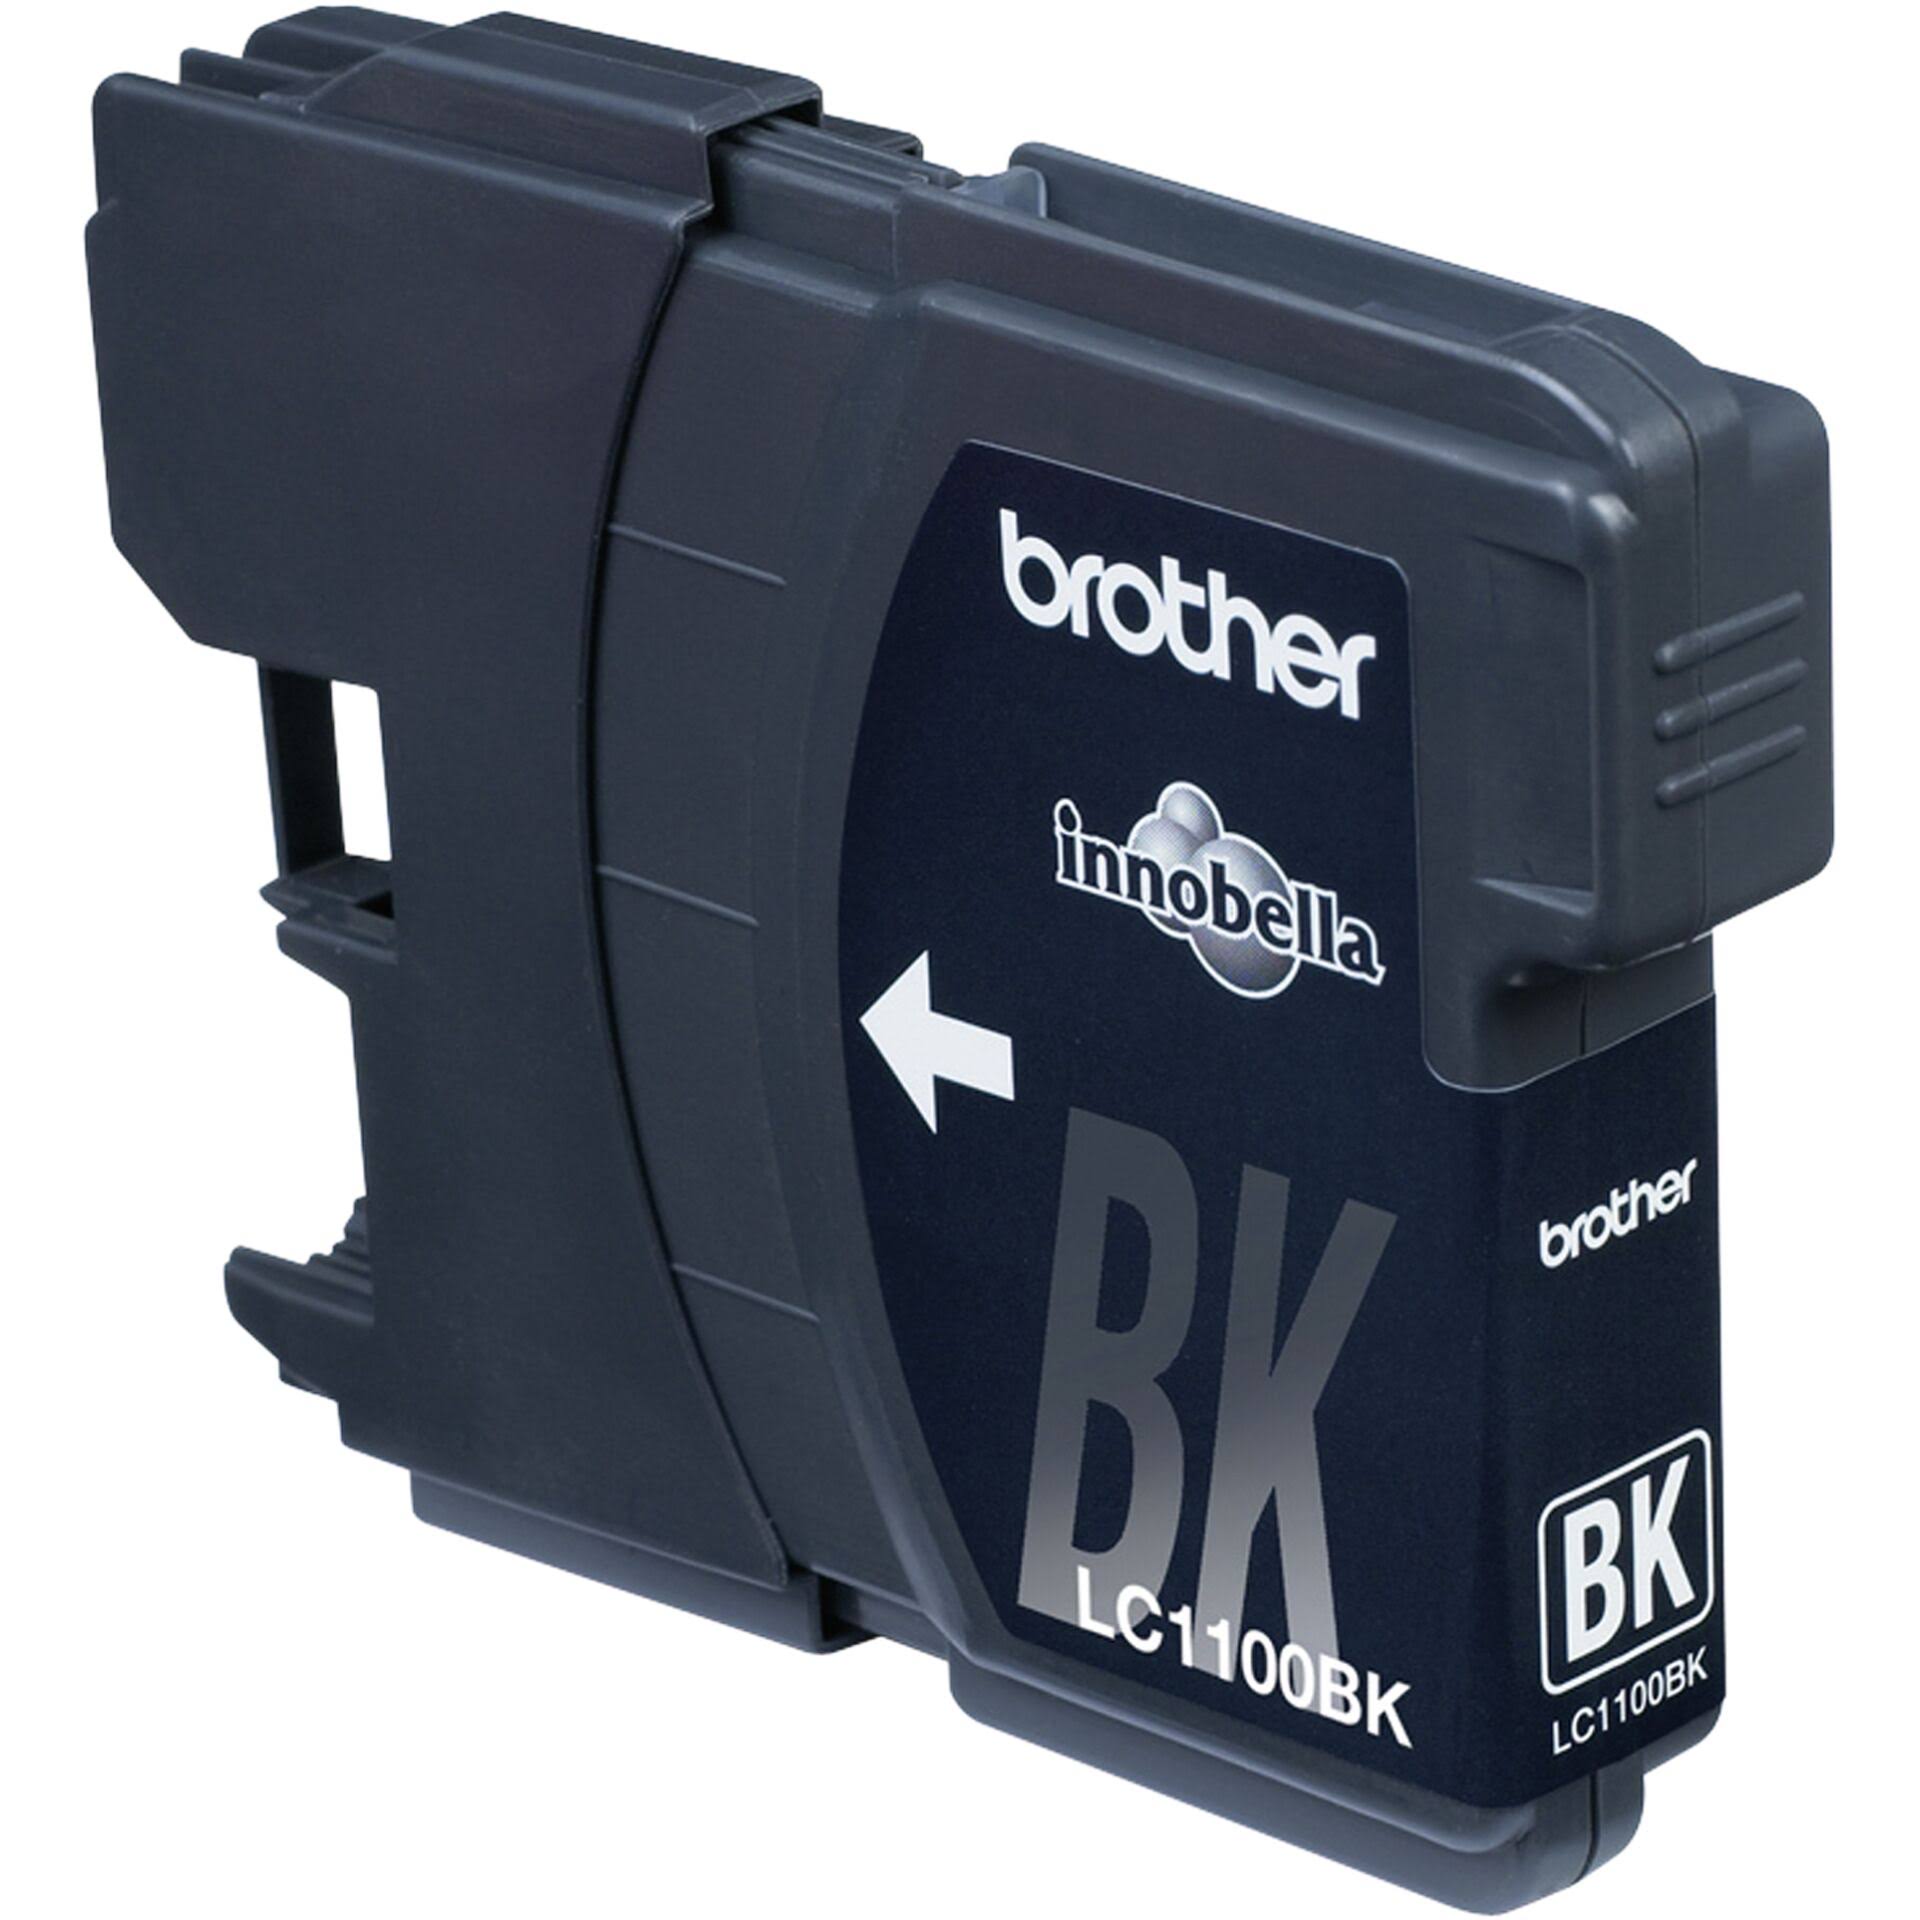 Brother LC 1100 Ink Cartridge - Black